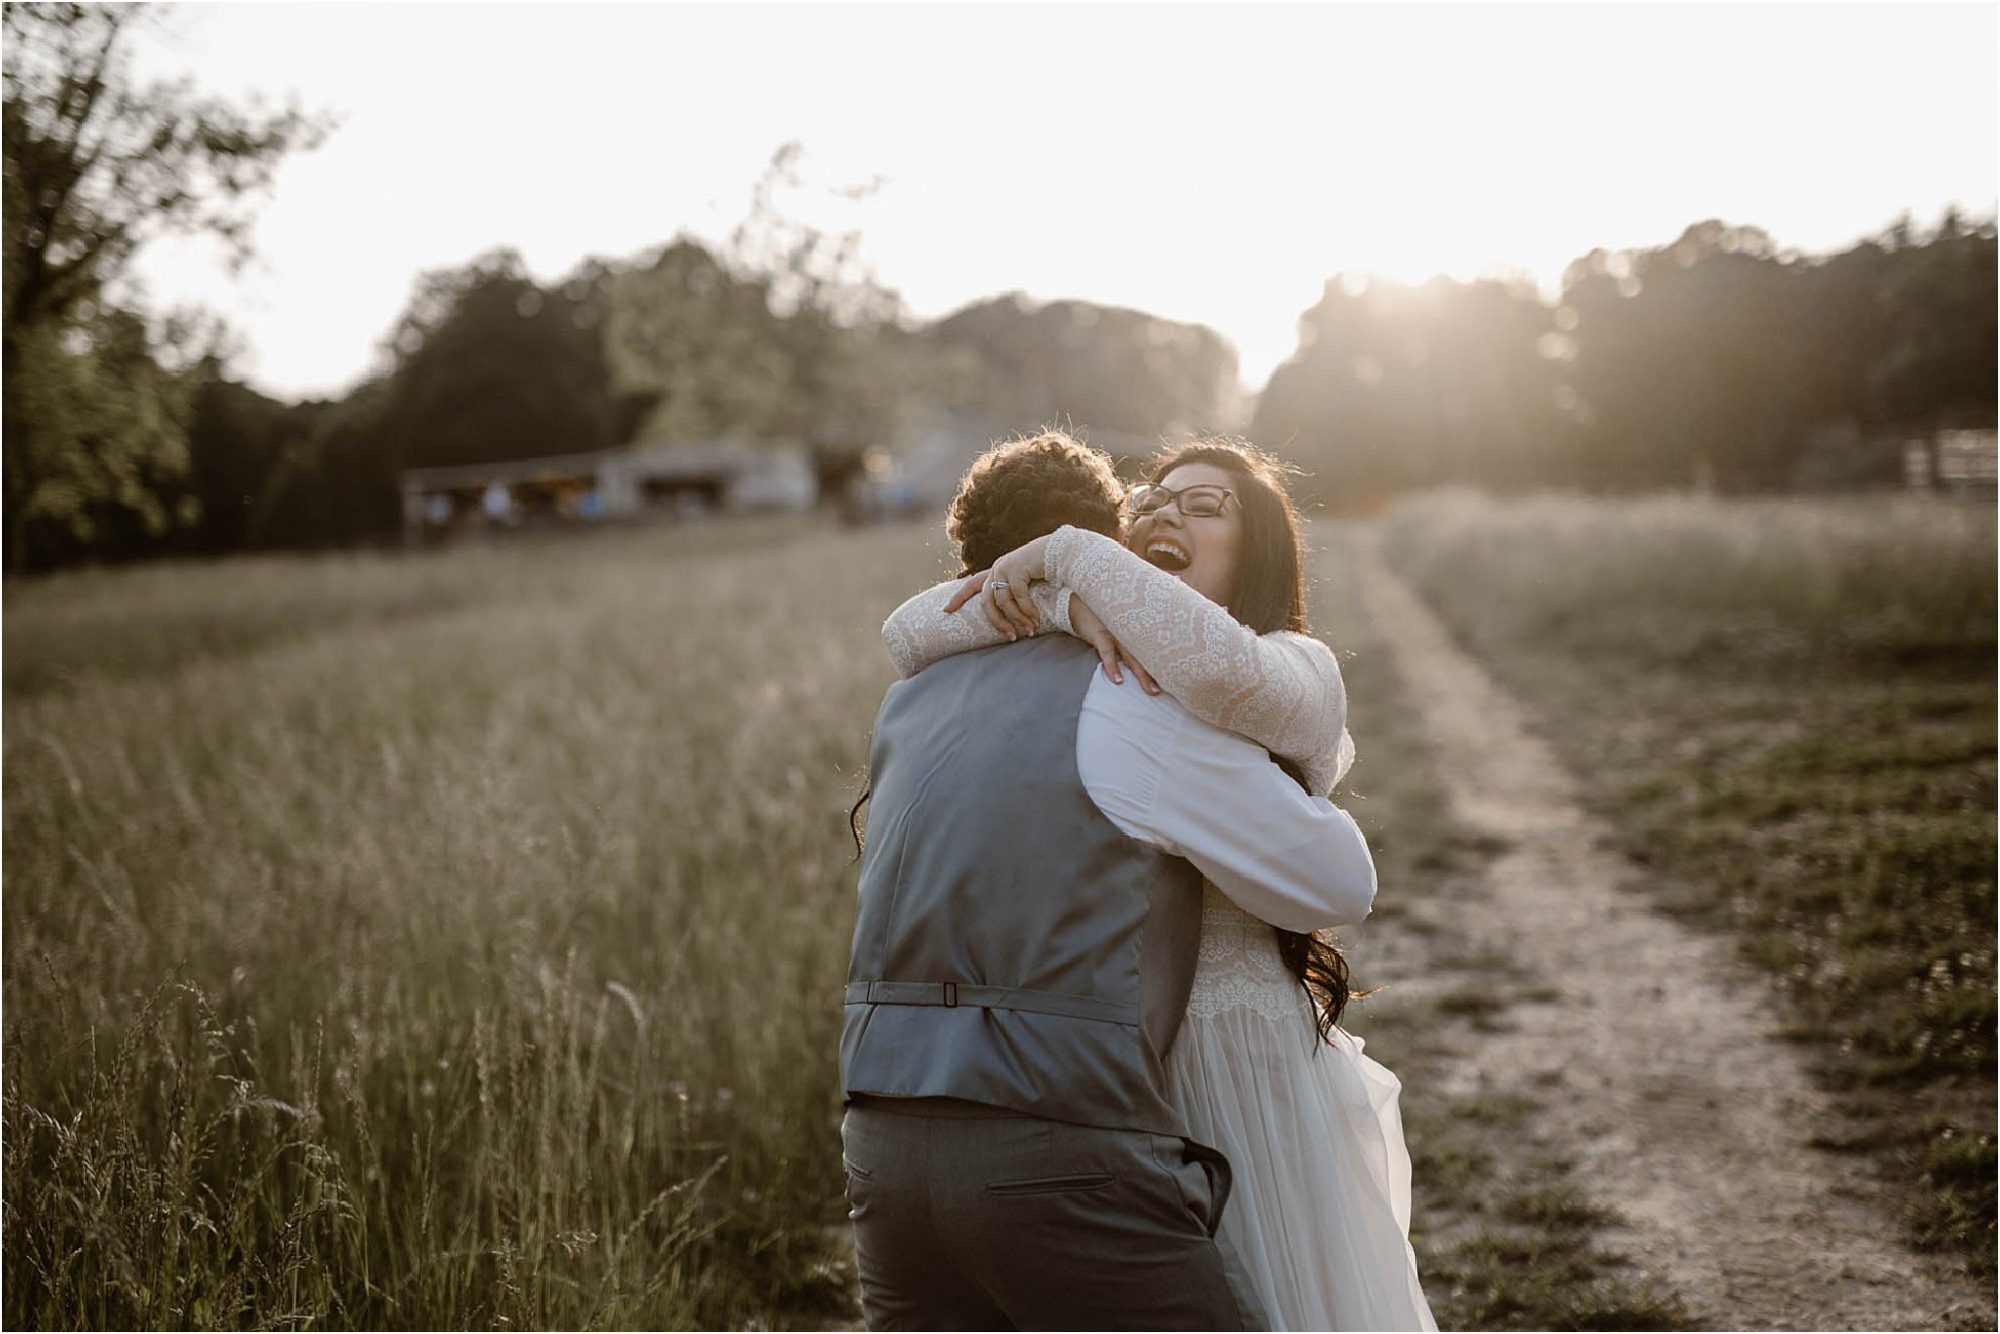 man and woman embracing in field during sunset